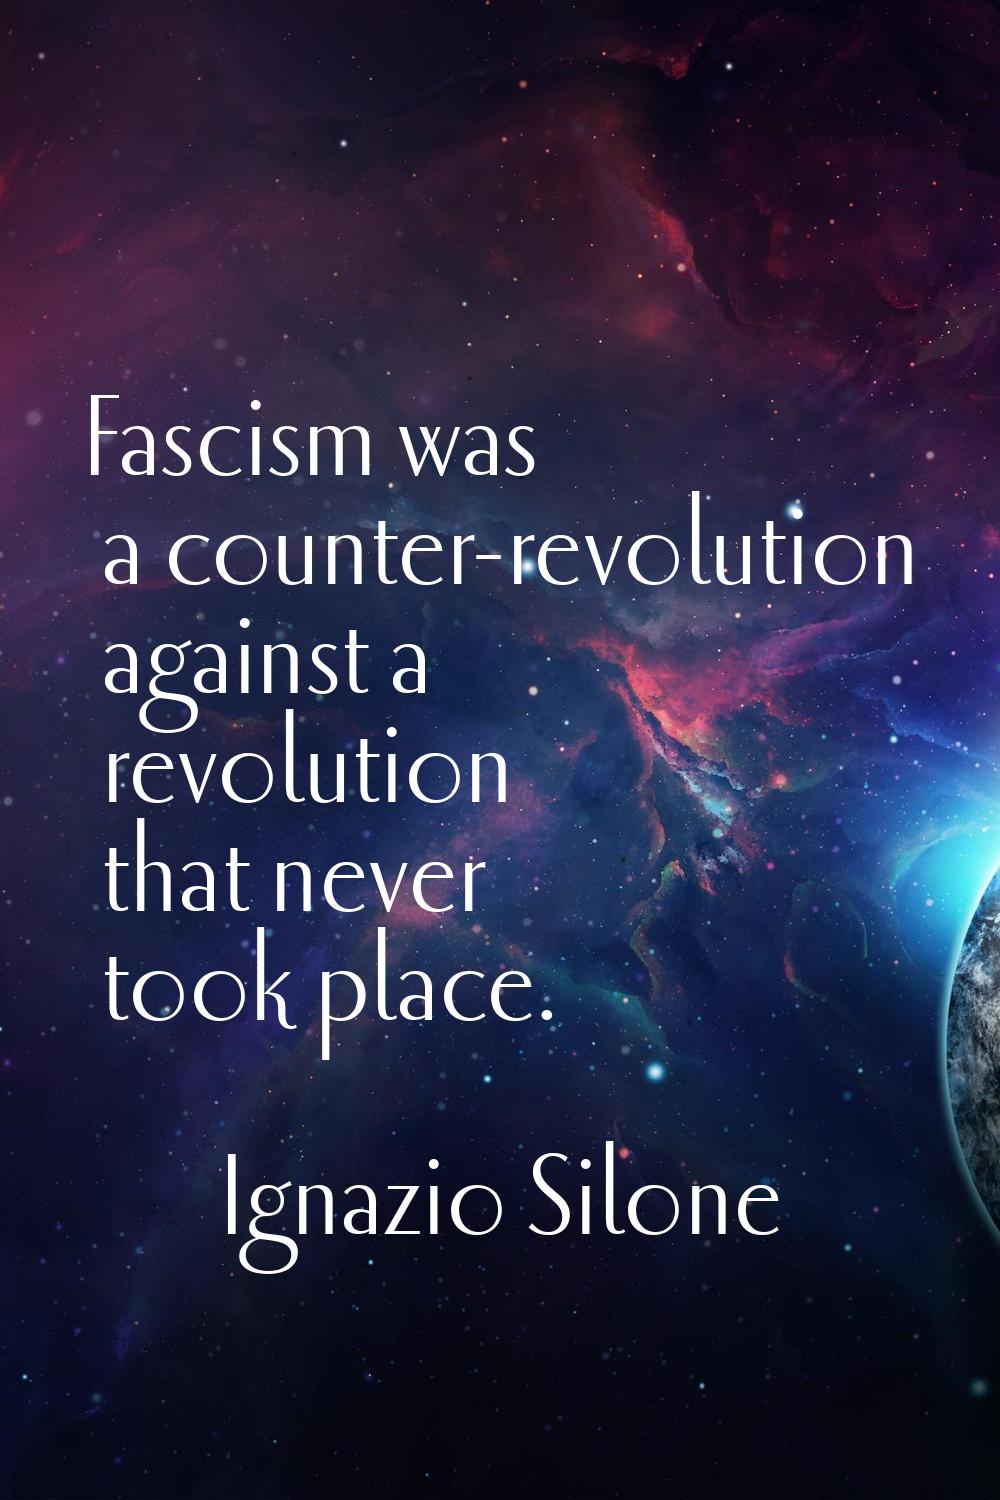 Fascism was a counter-revolution against a revolution that never took place.